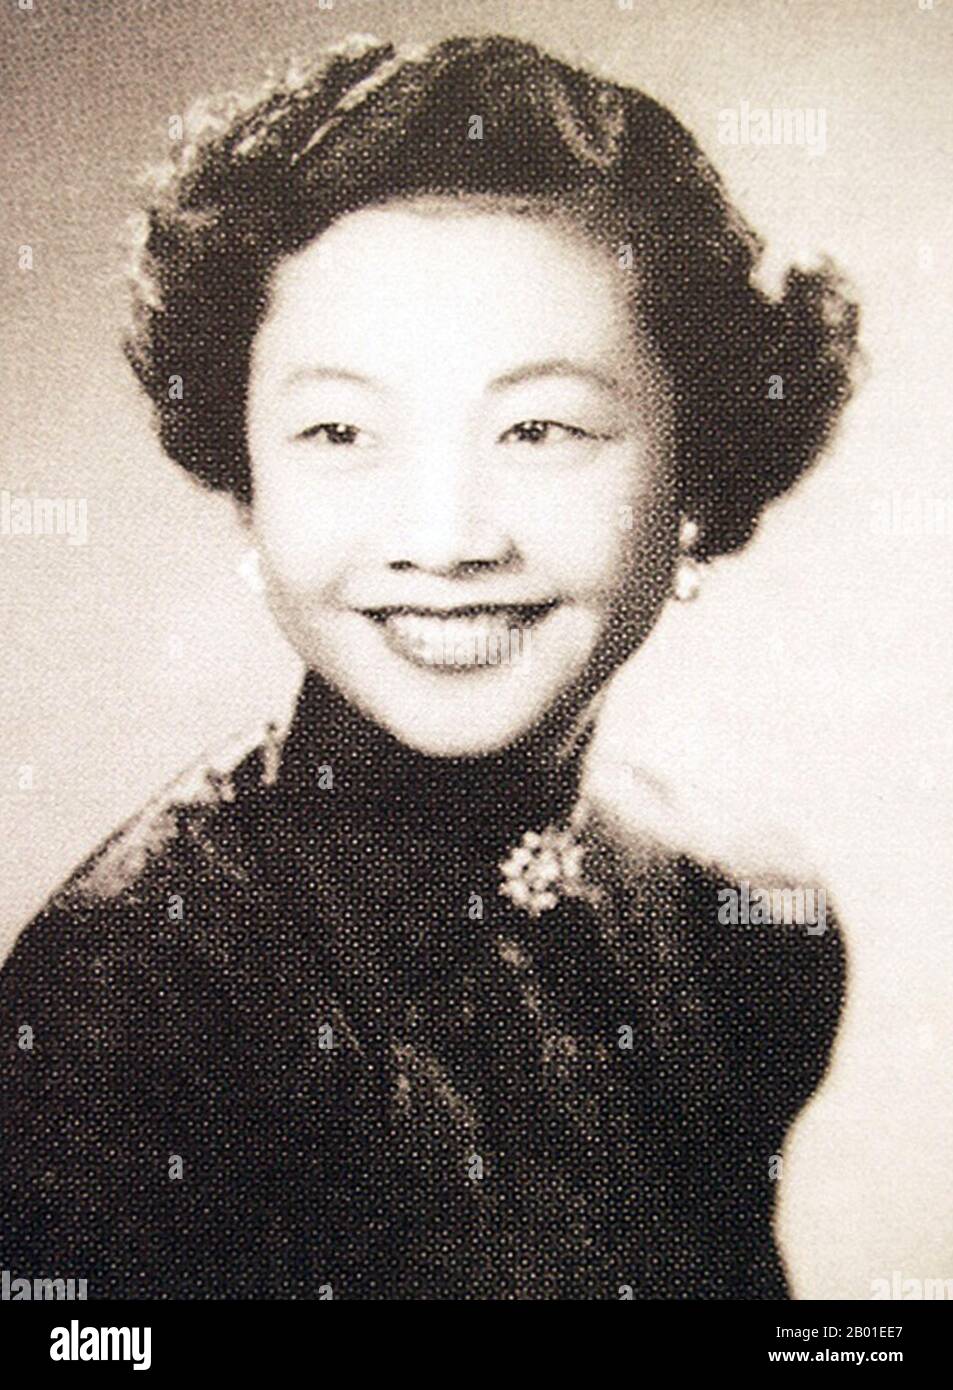 China: Yao Lee (10 September 1922 - 19 July 2019), one of the 'seven great singing stars' in Shanghai during the 1930s and 1940s, 1940s.  Yao Lee (姚莉), also known as Yiu Lei and Miss Hue Lee, was a Chinese singer from the 1930s to the 1970s. By the 1940s, she became one of the seven great singing stars.  Born Yáo Xiùyún/Yiu Sau Wan in Shanghai, Yao began performing with a radio appearance there in 1935 at the age of 13. She was signed to Pathe Records. Yao was known as 'the Silver Voice' (銀嗓子) alluding to fellow Shanghai singer Zhou Xuan, who was known as 'the Golden Voice' (金嗓子). Stock Photo